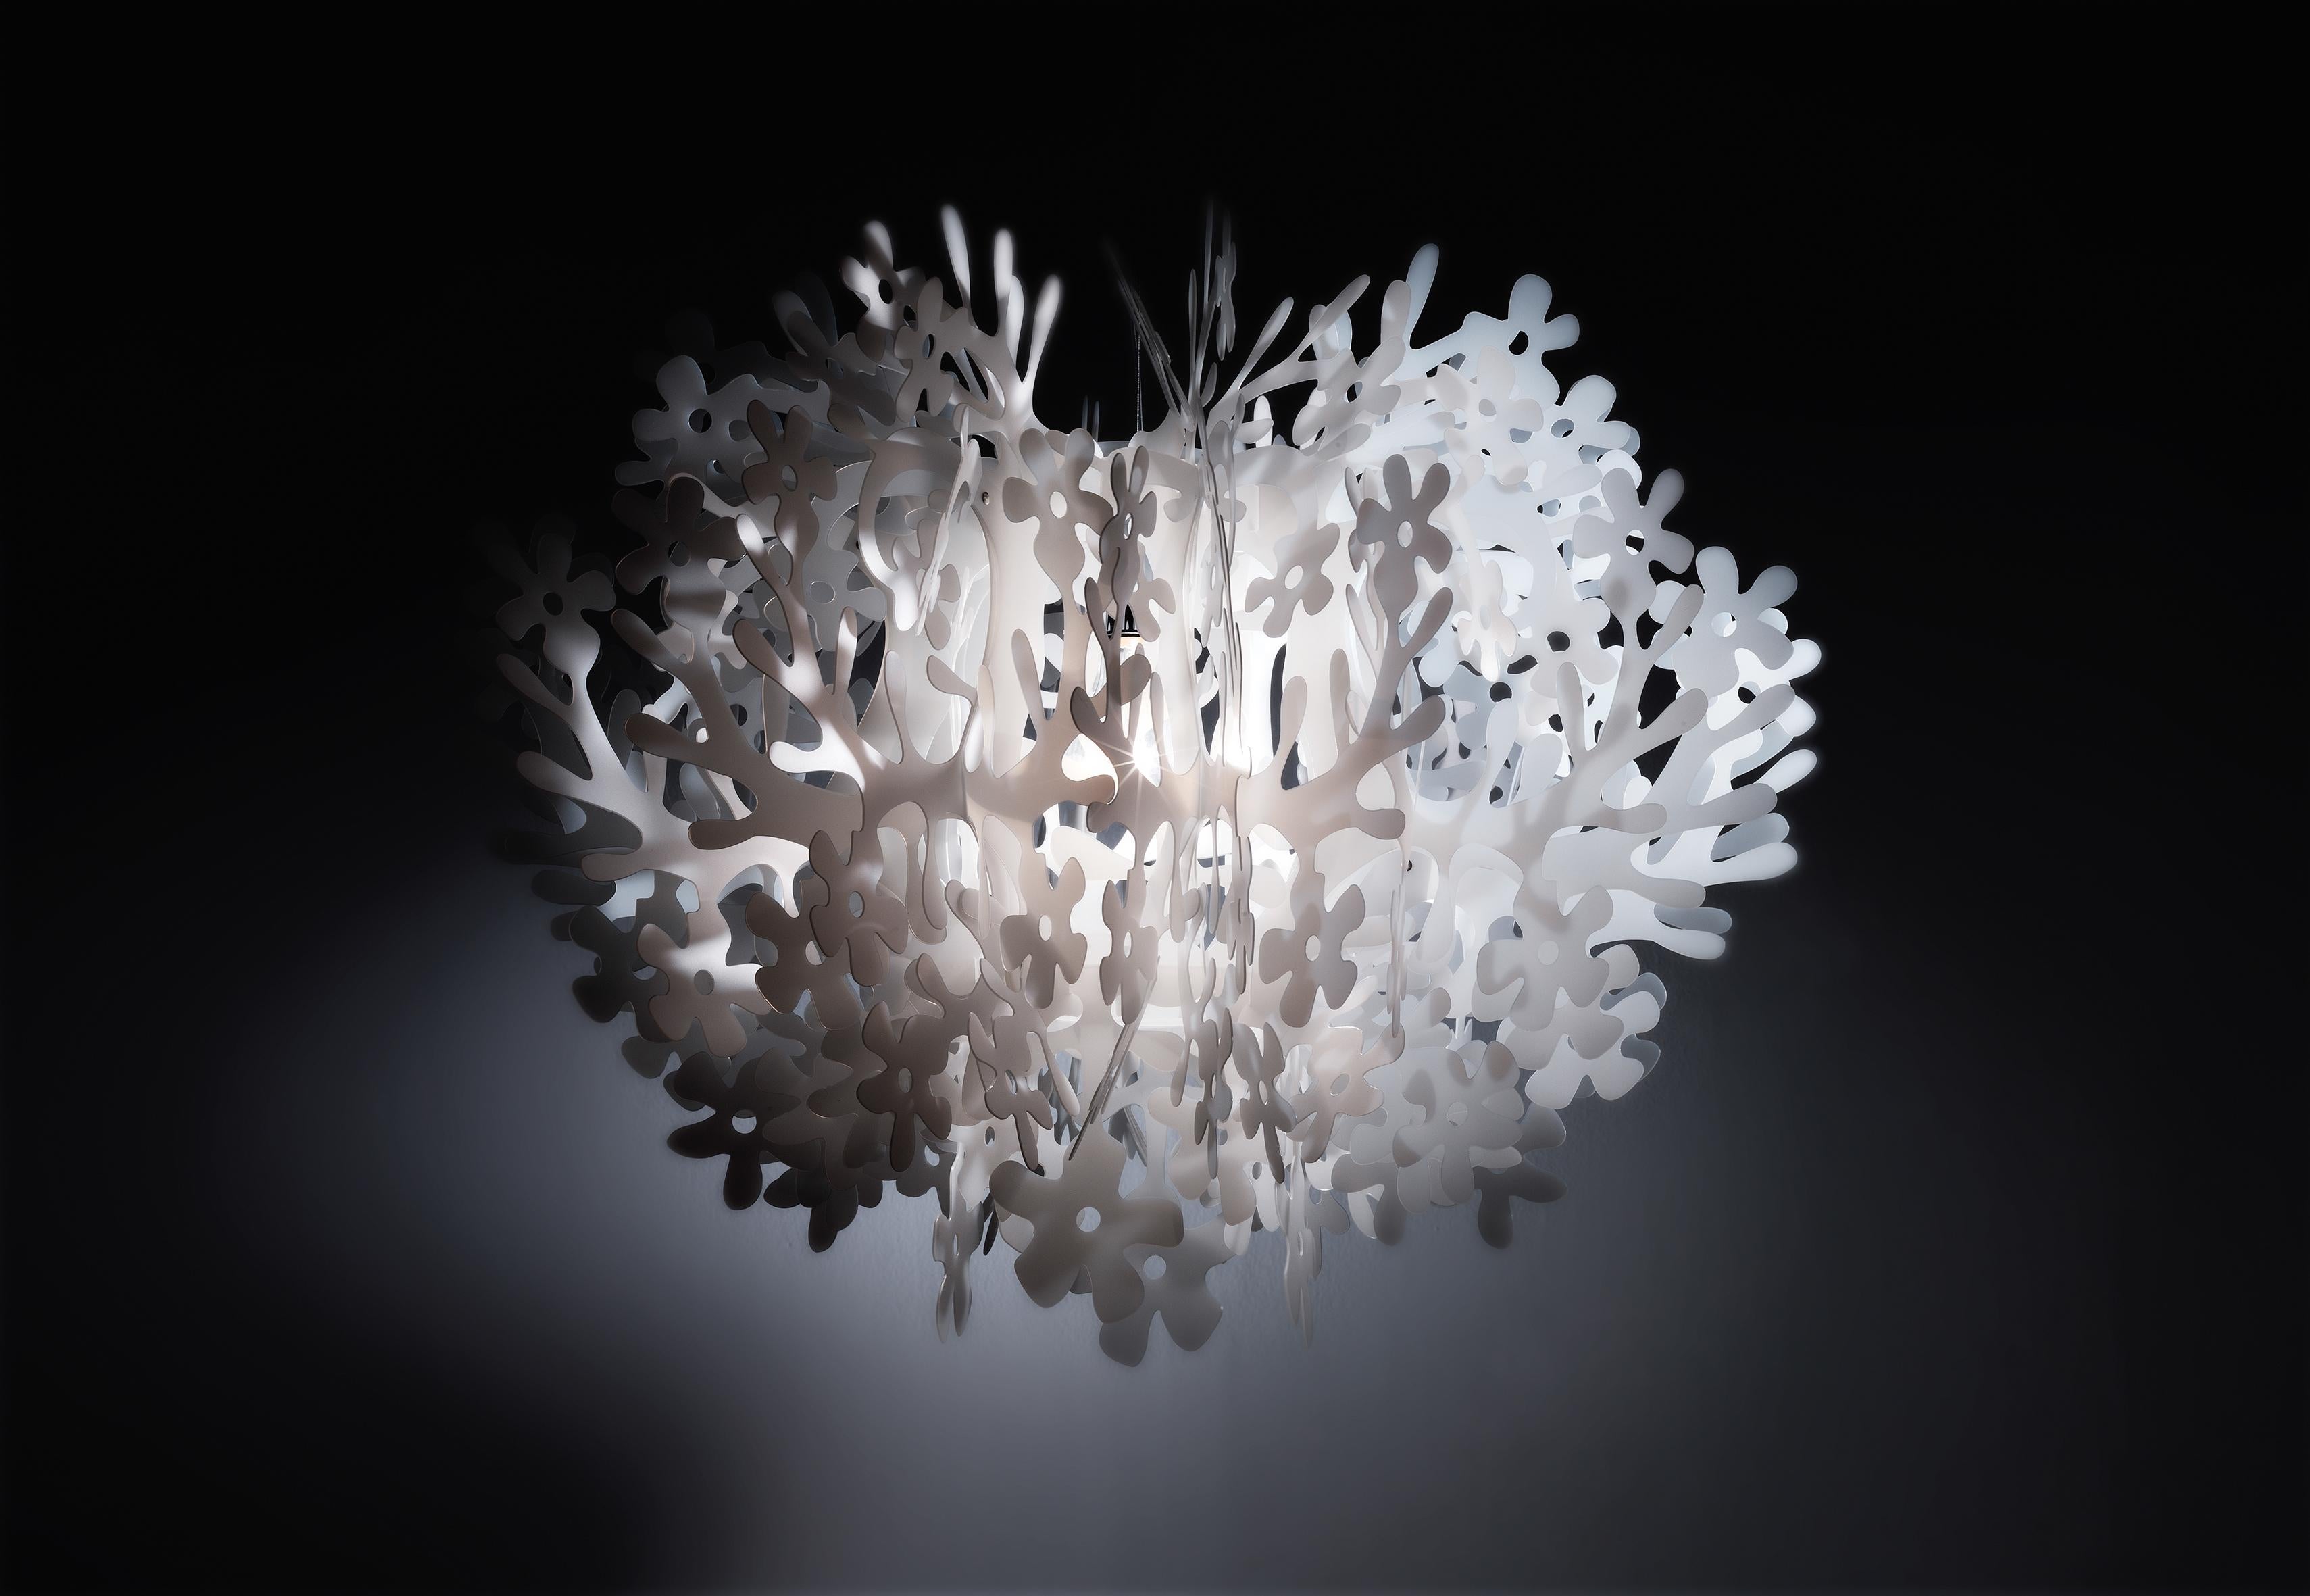 Suggestive, realistic and welcoming; Fiorella’s natural details conjure up a world covered in flora. Slamp’s expressive powers and fresh figurativeness meet in a flurry of reflective, luminous petals that transform and enchant any interior with